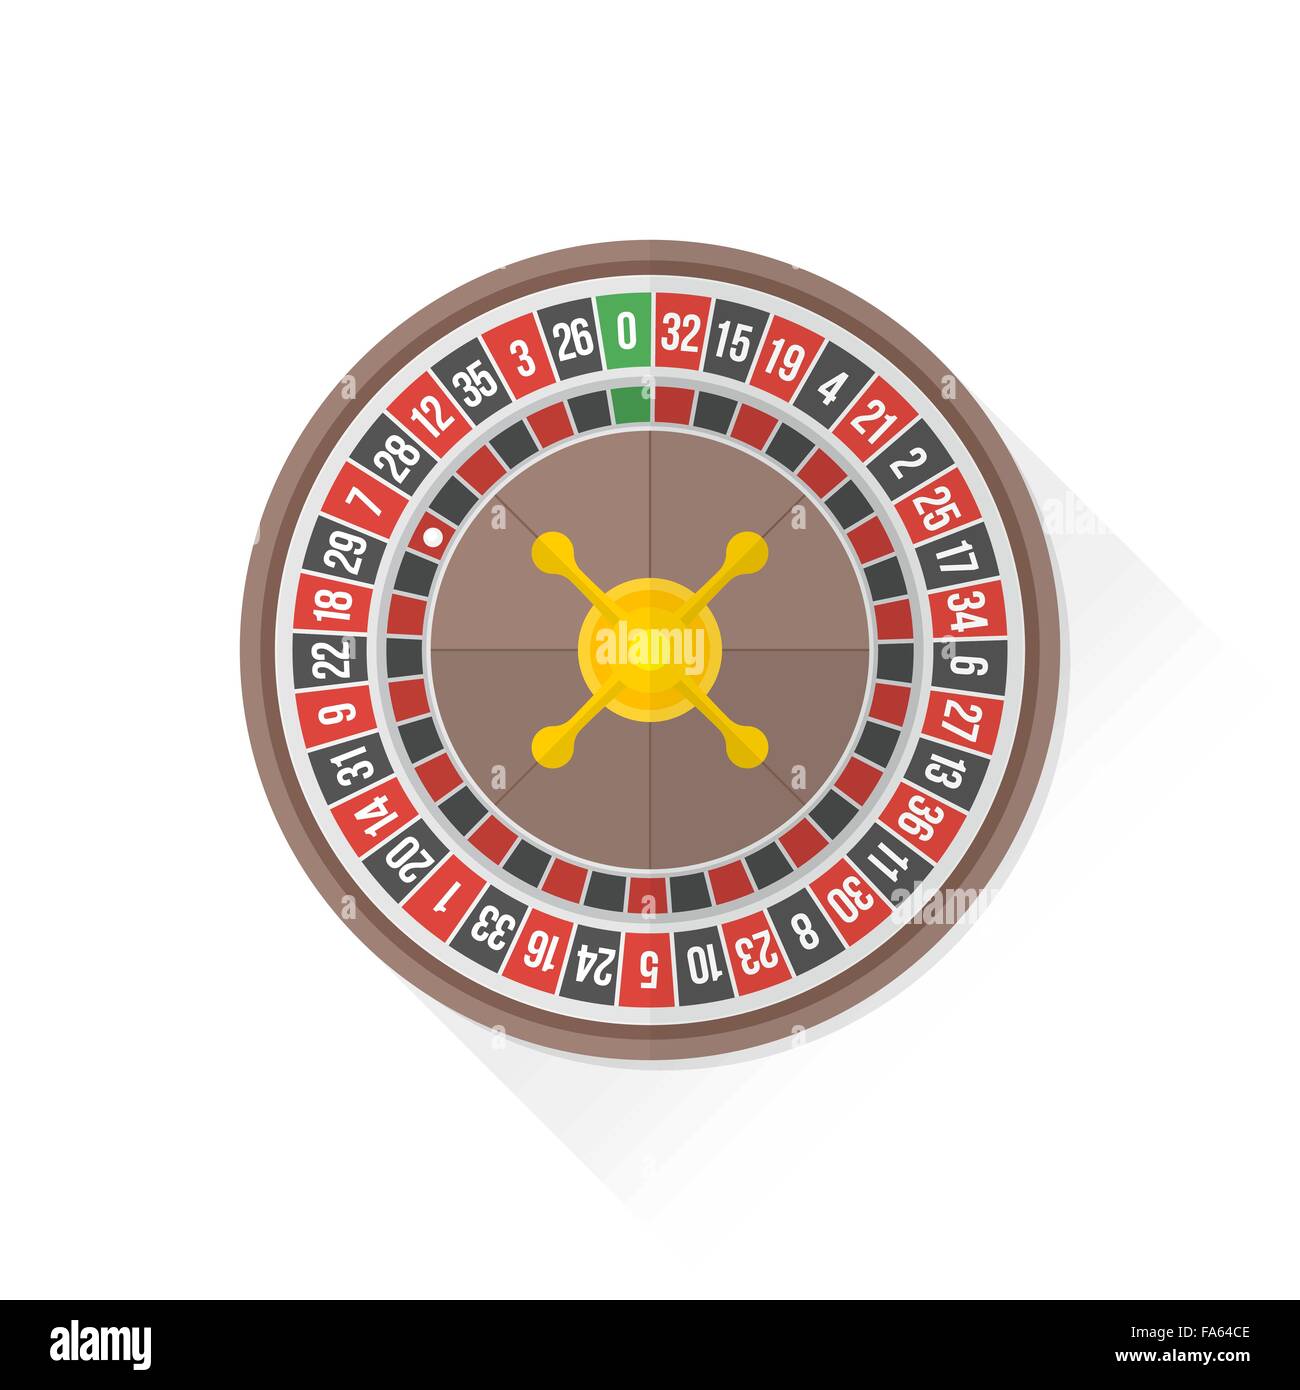 vector gambling casino roulette wheel isolated flat design illustration on white background with shadow Stock Vector